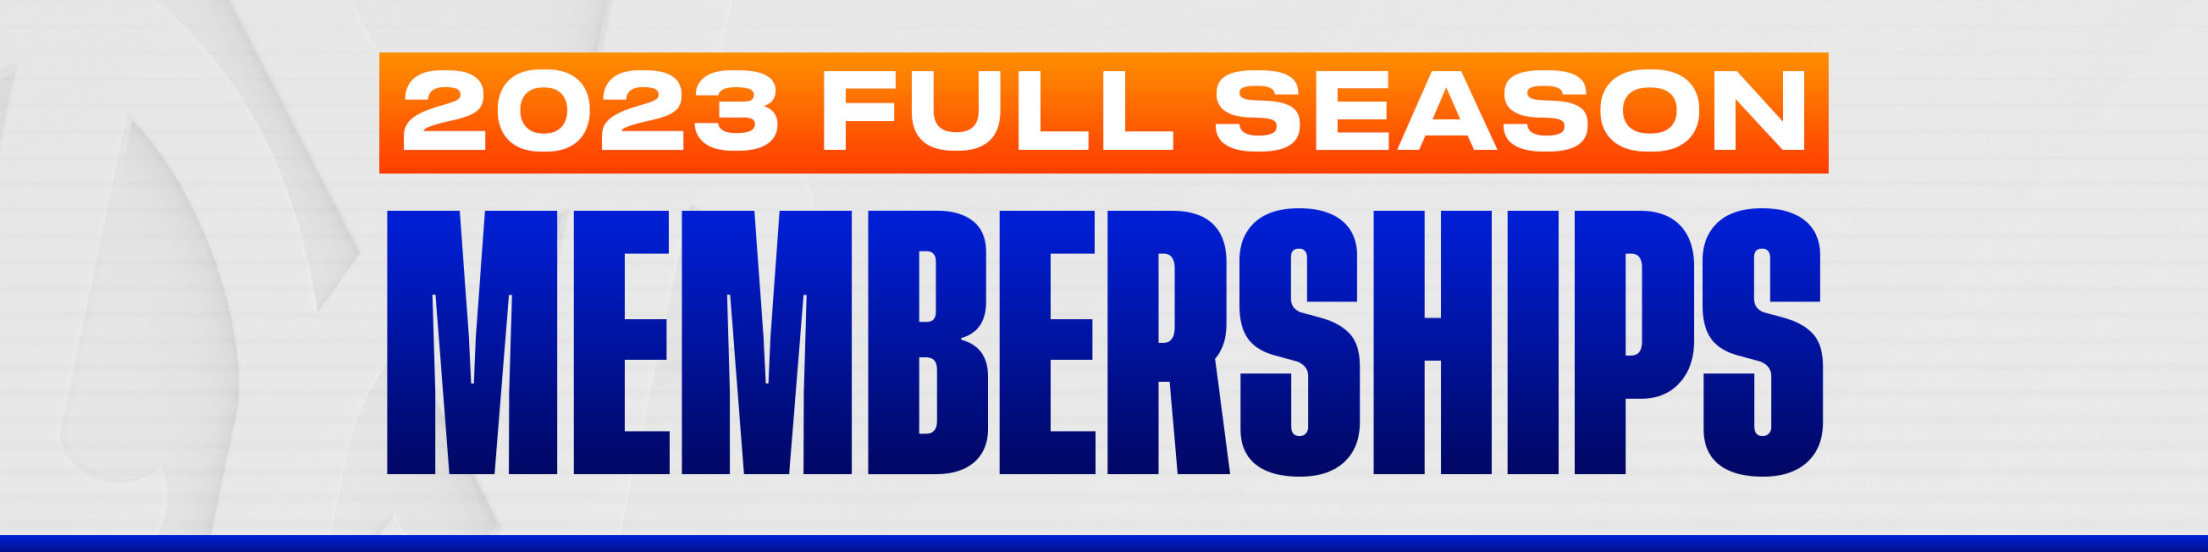 St. Lucie Mets - New York Mets Spring Training season tickets for 2023 are  on sale NOW! TIX